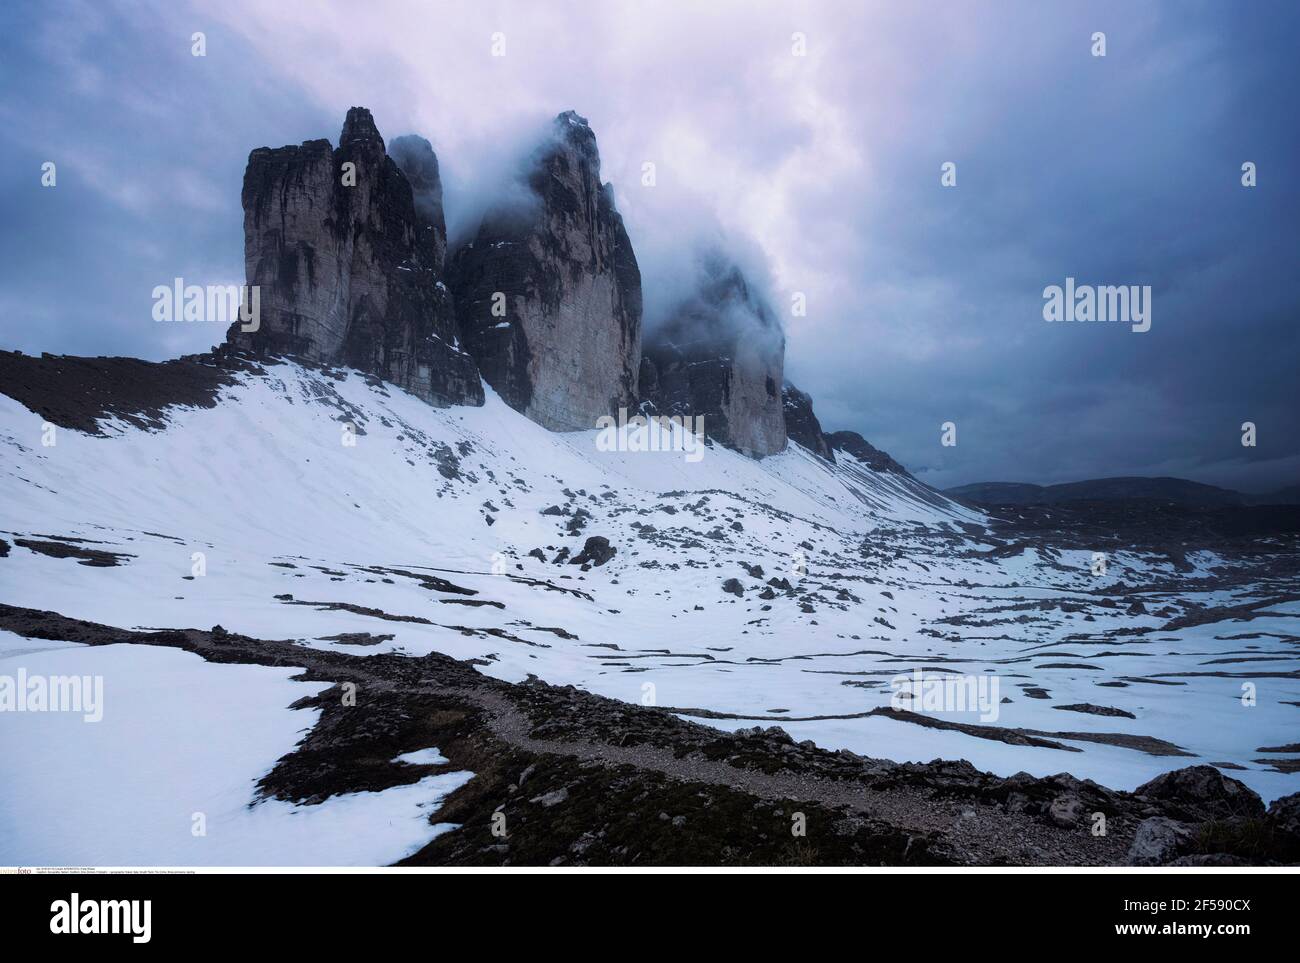 geography / travel, Italy, South Tyrol, Tre Cime, three pinnacle, spring, Additional-Rights-Clearance-Info-Not-Available Stock Photo